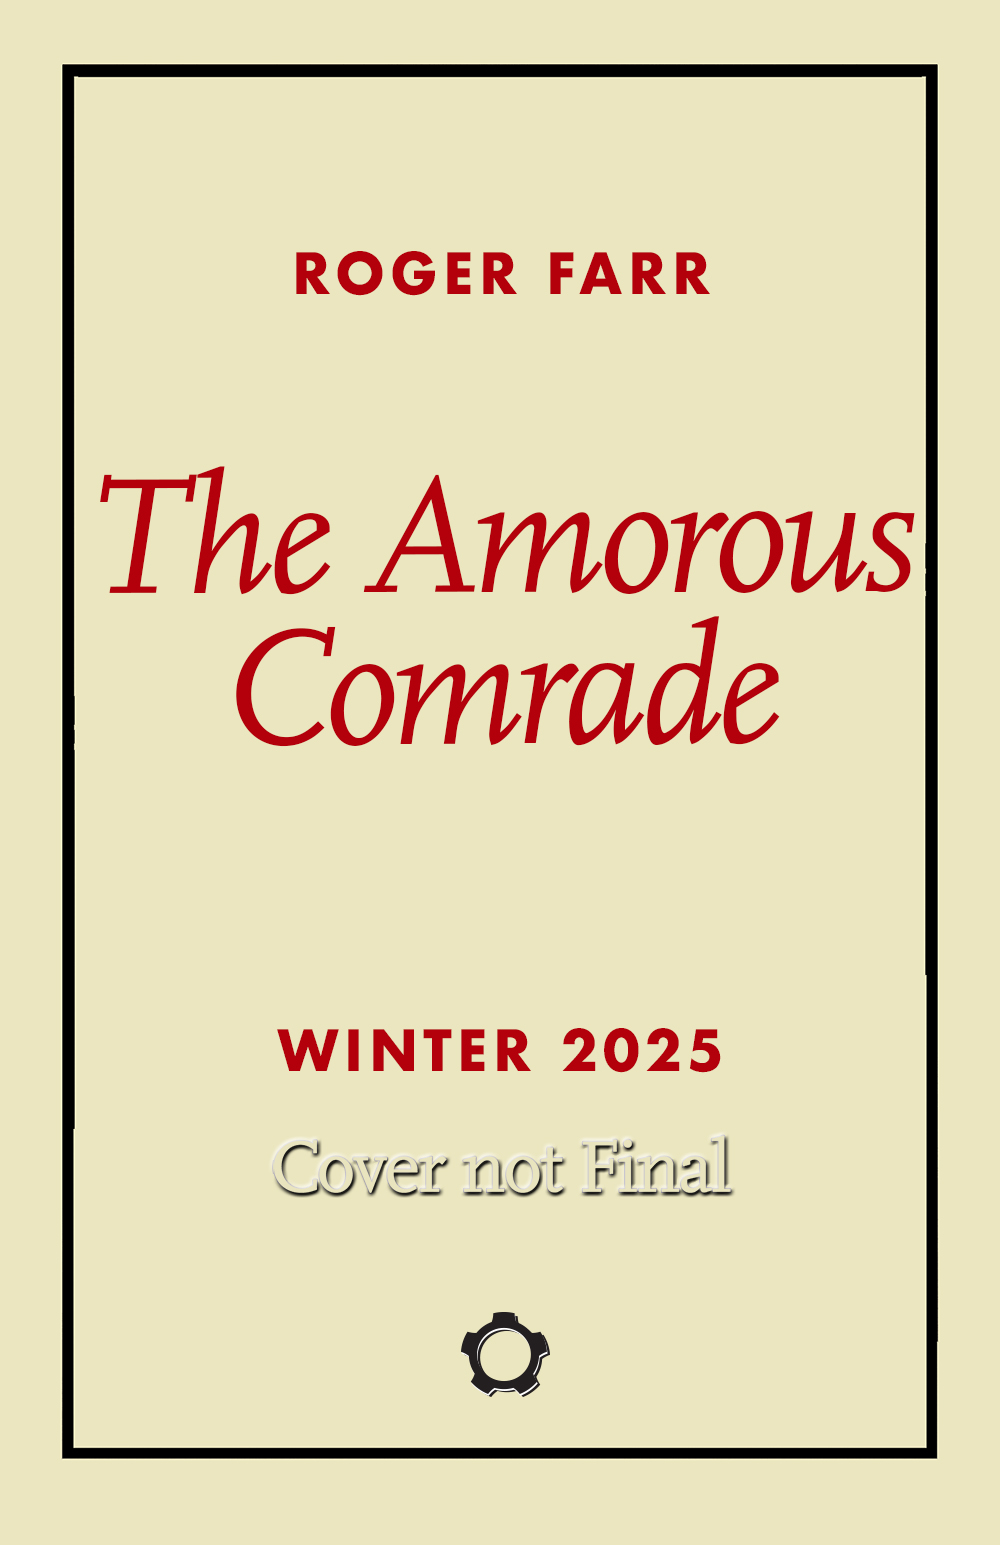 The Amorous Comrade by Roger Farr